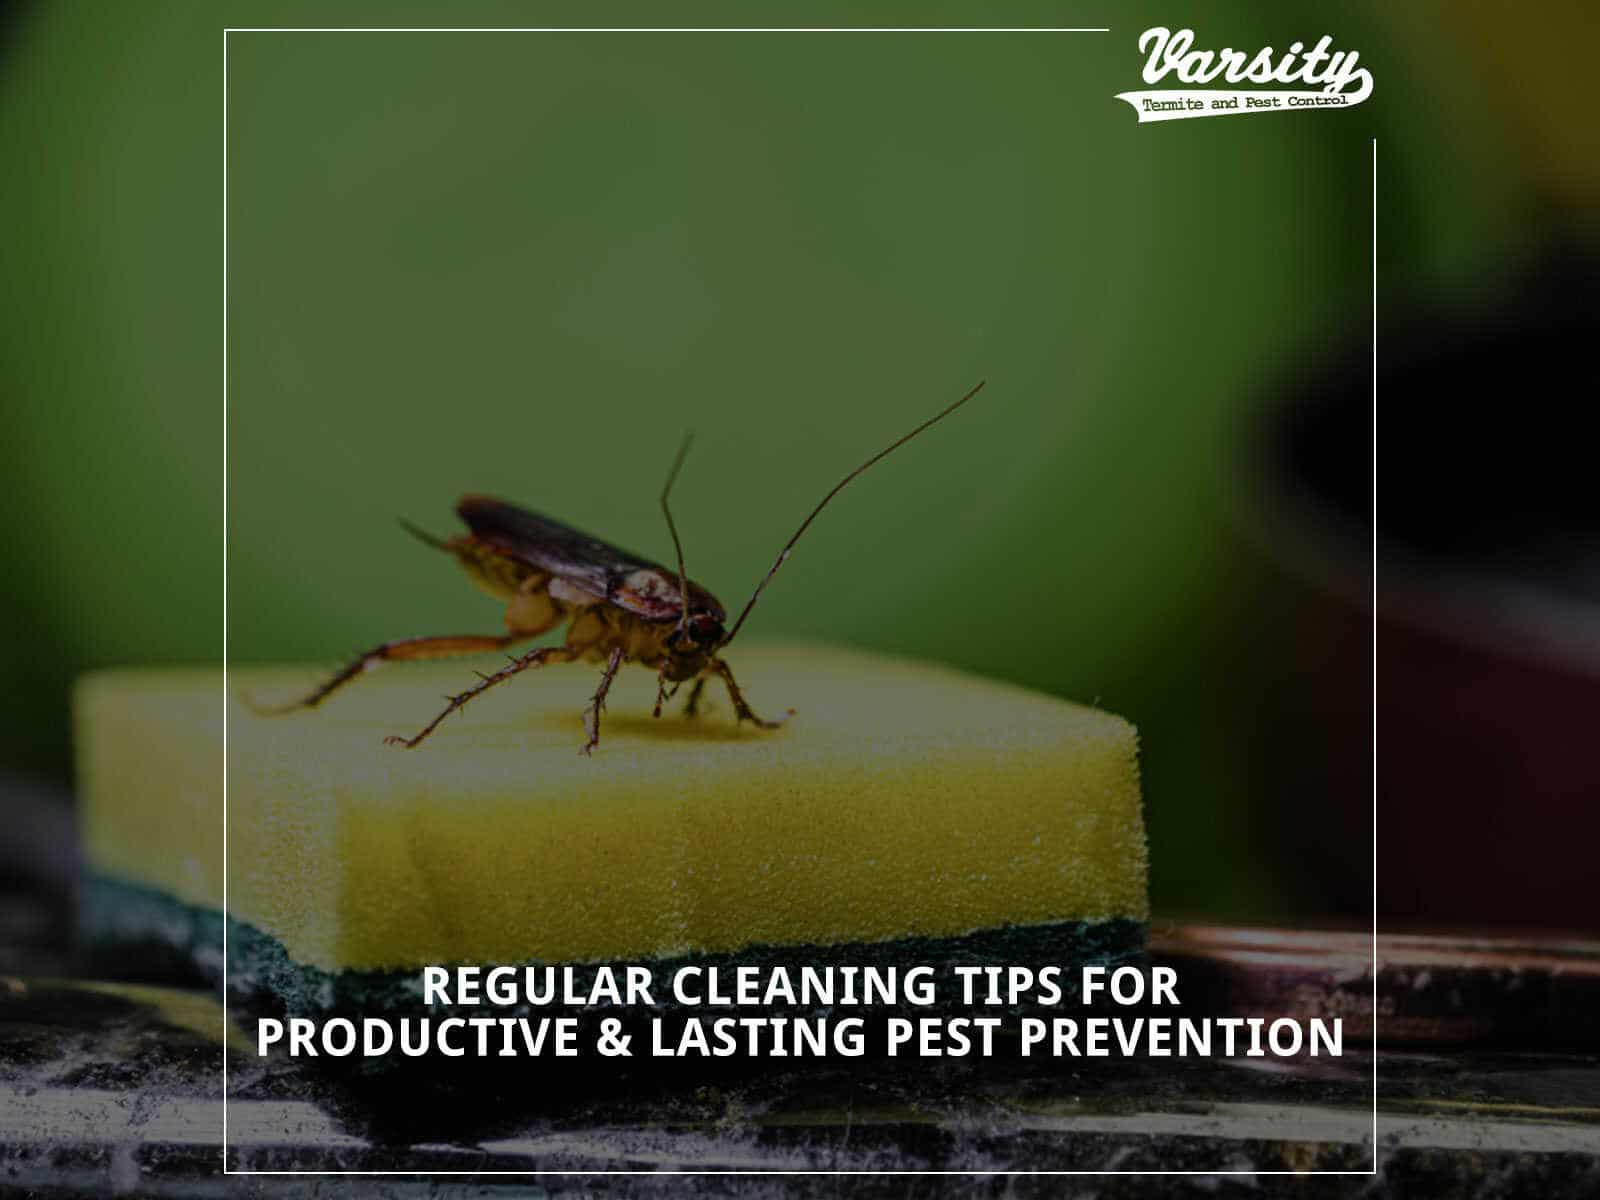 Regular Cleaning Tips For Productive & Lasting Pest Prevention